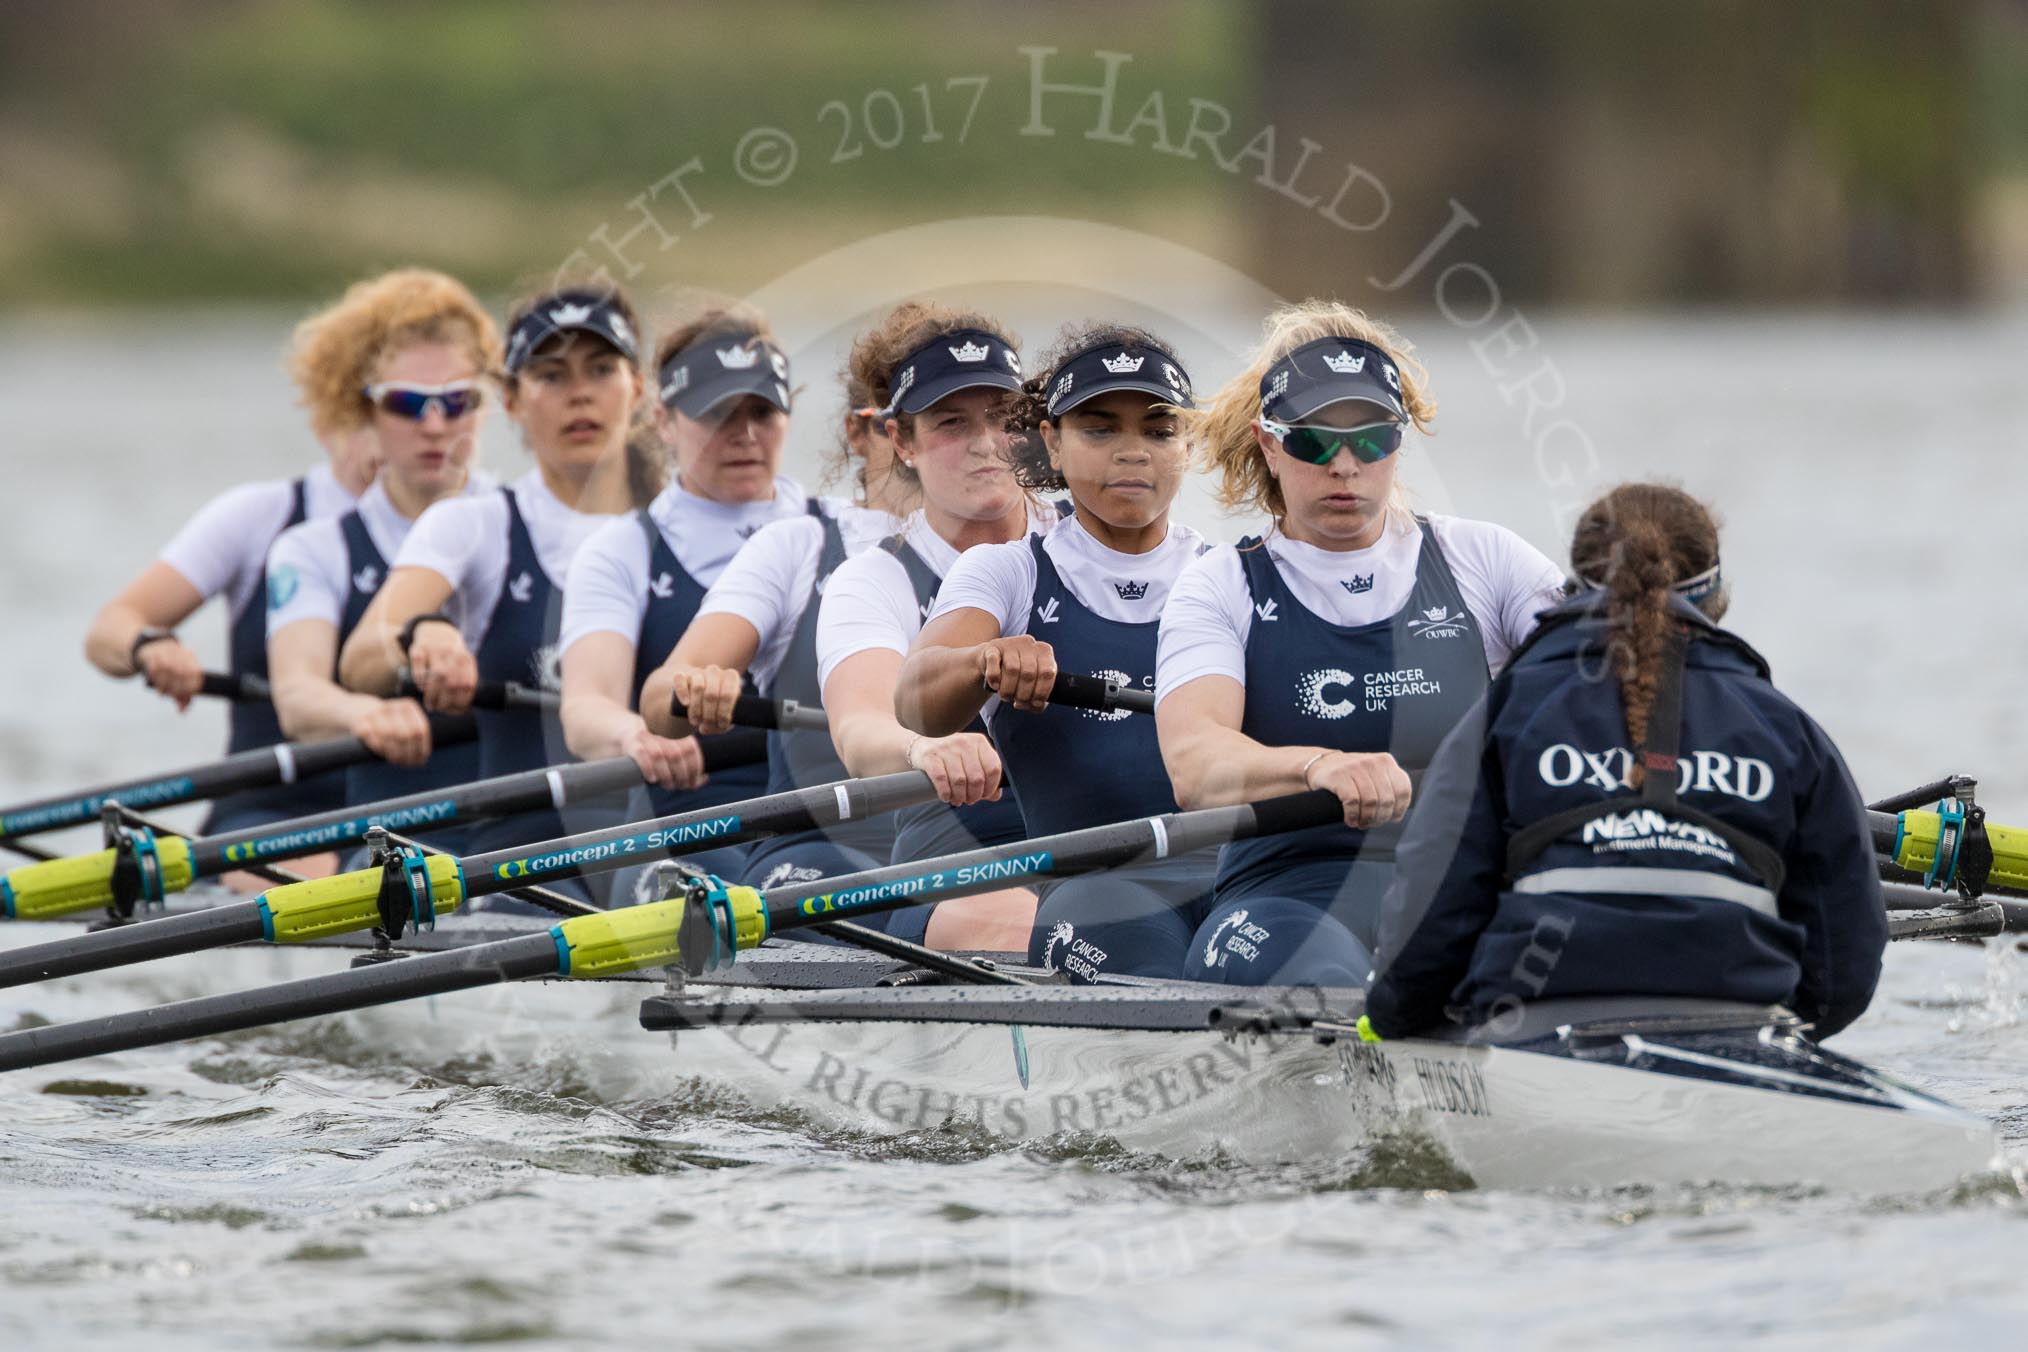 The Cancer Research UK Boat Race season 2017 - Women's Boat Race Fixture OUWBC vs Molesey BC: OUWBC starting at the second part of the fixture - bow Alice Roberts, 2 Beth Bridgman, 3 Rebecca Te Water Naude, 4 Rebecca Esselstein, 5 Chloe Laverack, 6 Harriet Austin, 7 Jenna Hebert, stroke Emily Cameron, cox Eleanor Shearer.
River Thames between Putney Bridge and Mortlake,
London SW15,

United Kingdom,
on 19 March 2017 at 16:21, image #126